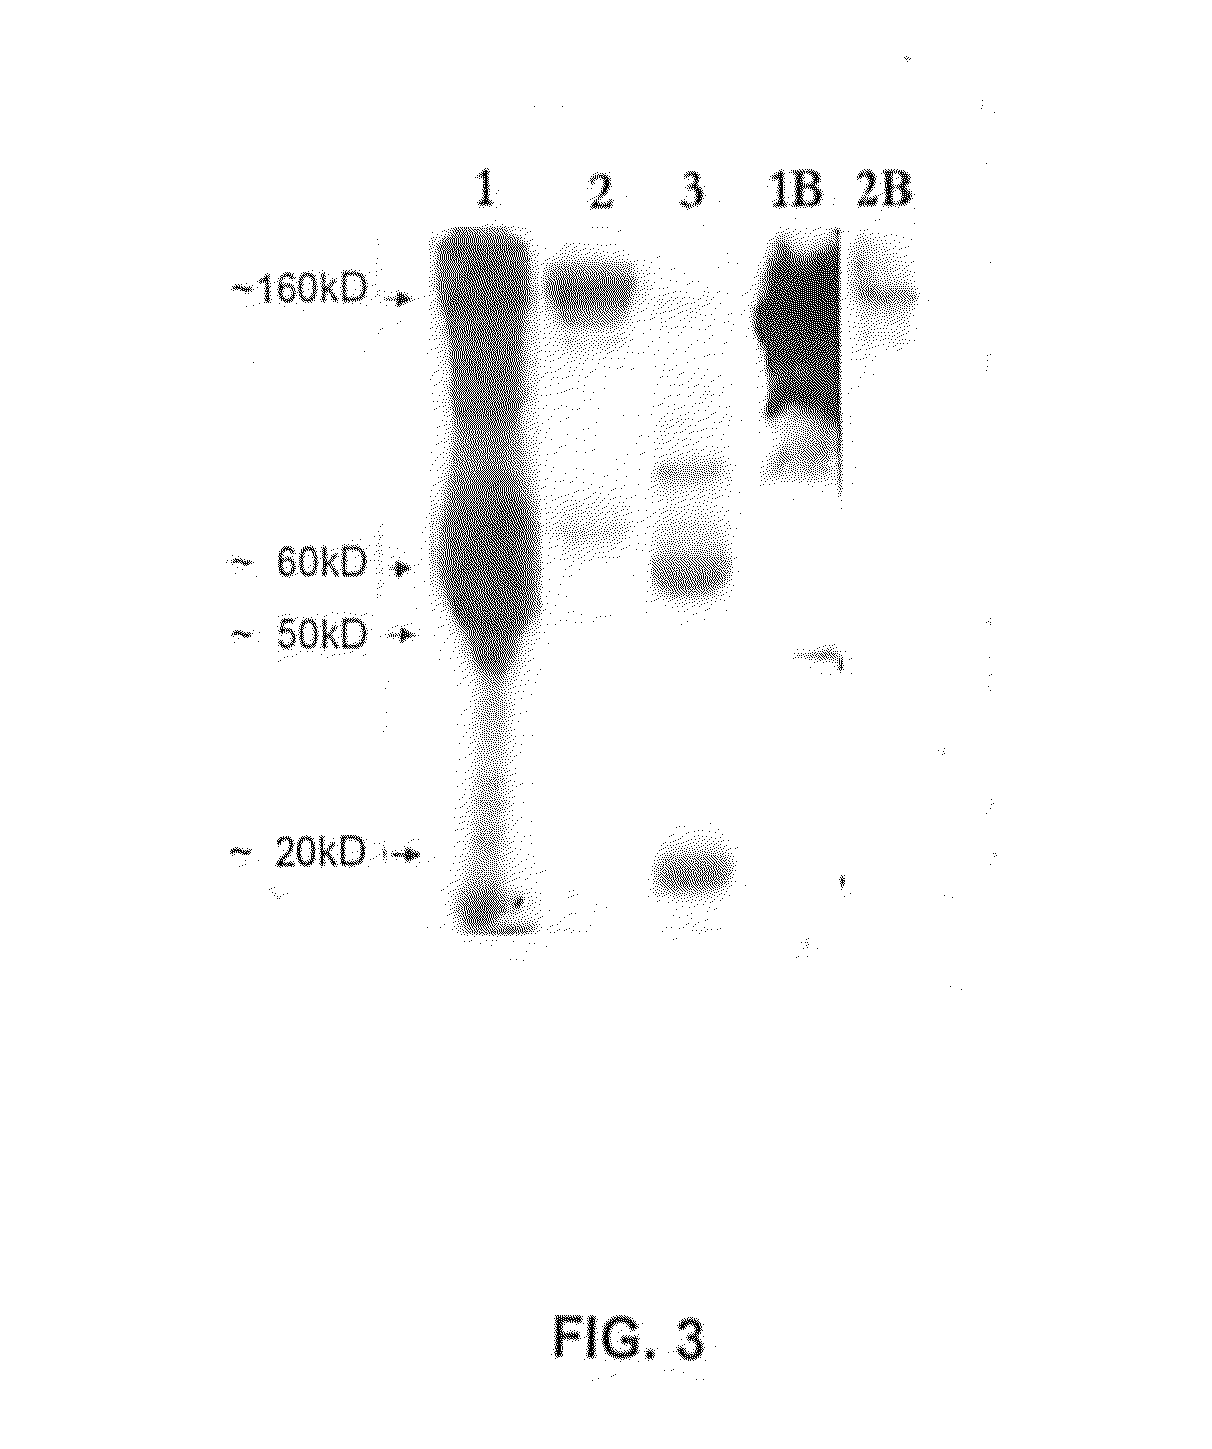 Pancreatic cancer associated antigen, antibody thereto, and diagnostic and treatment methods